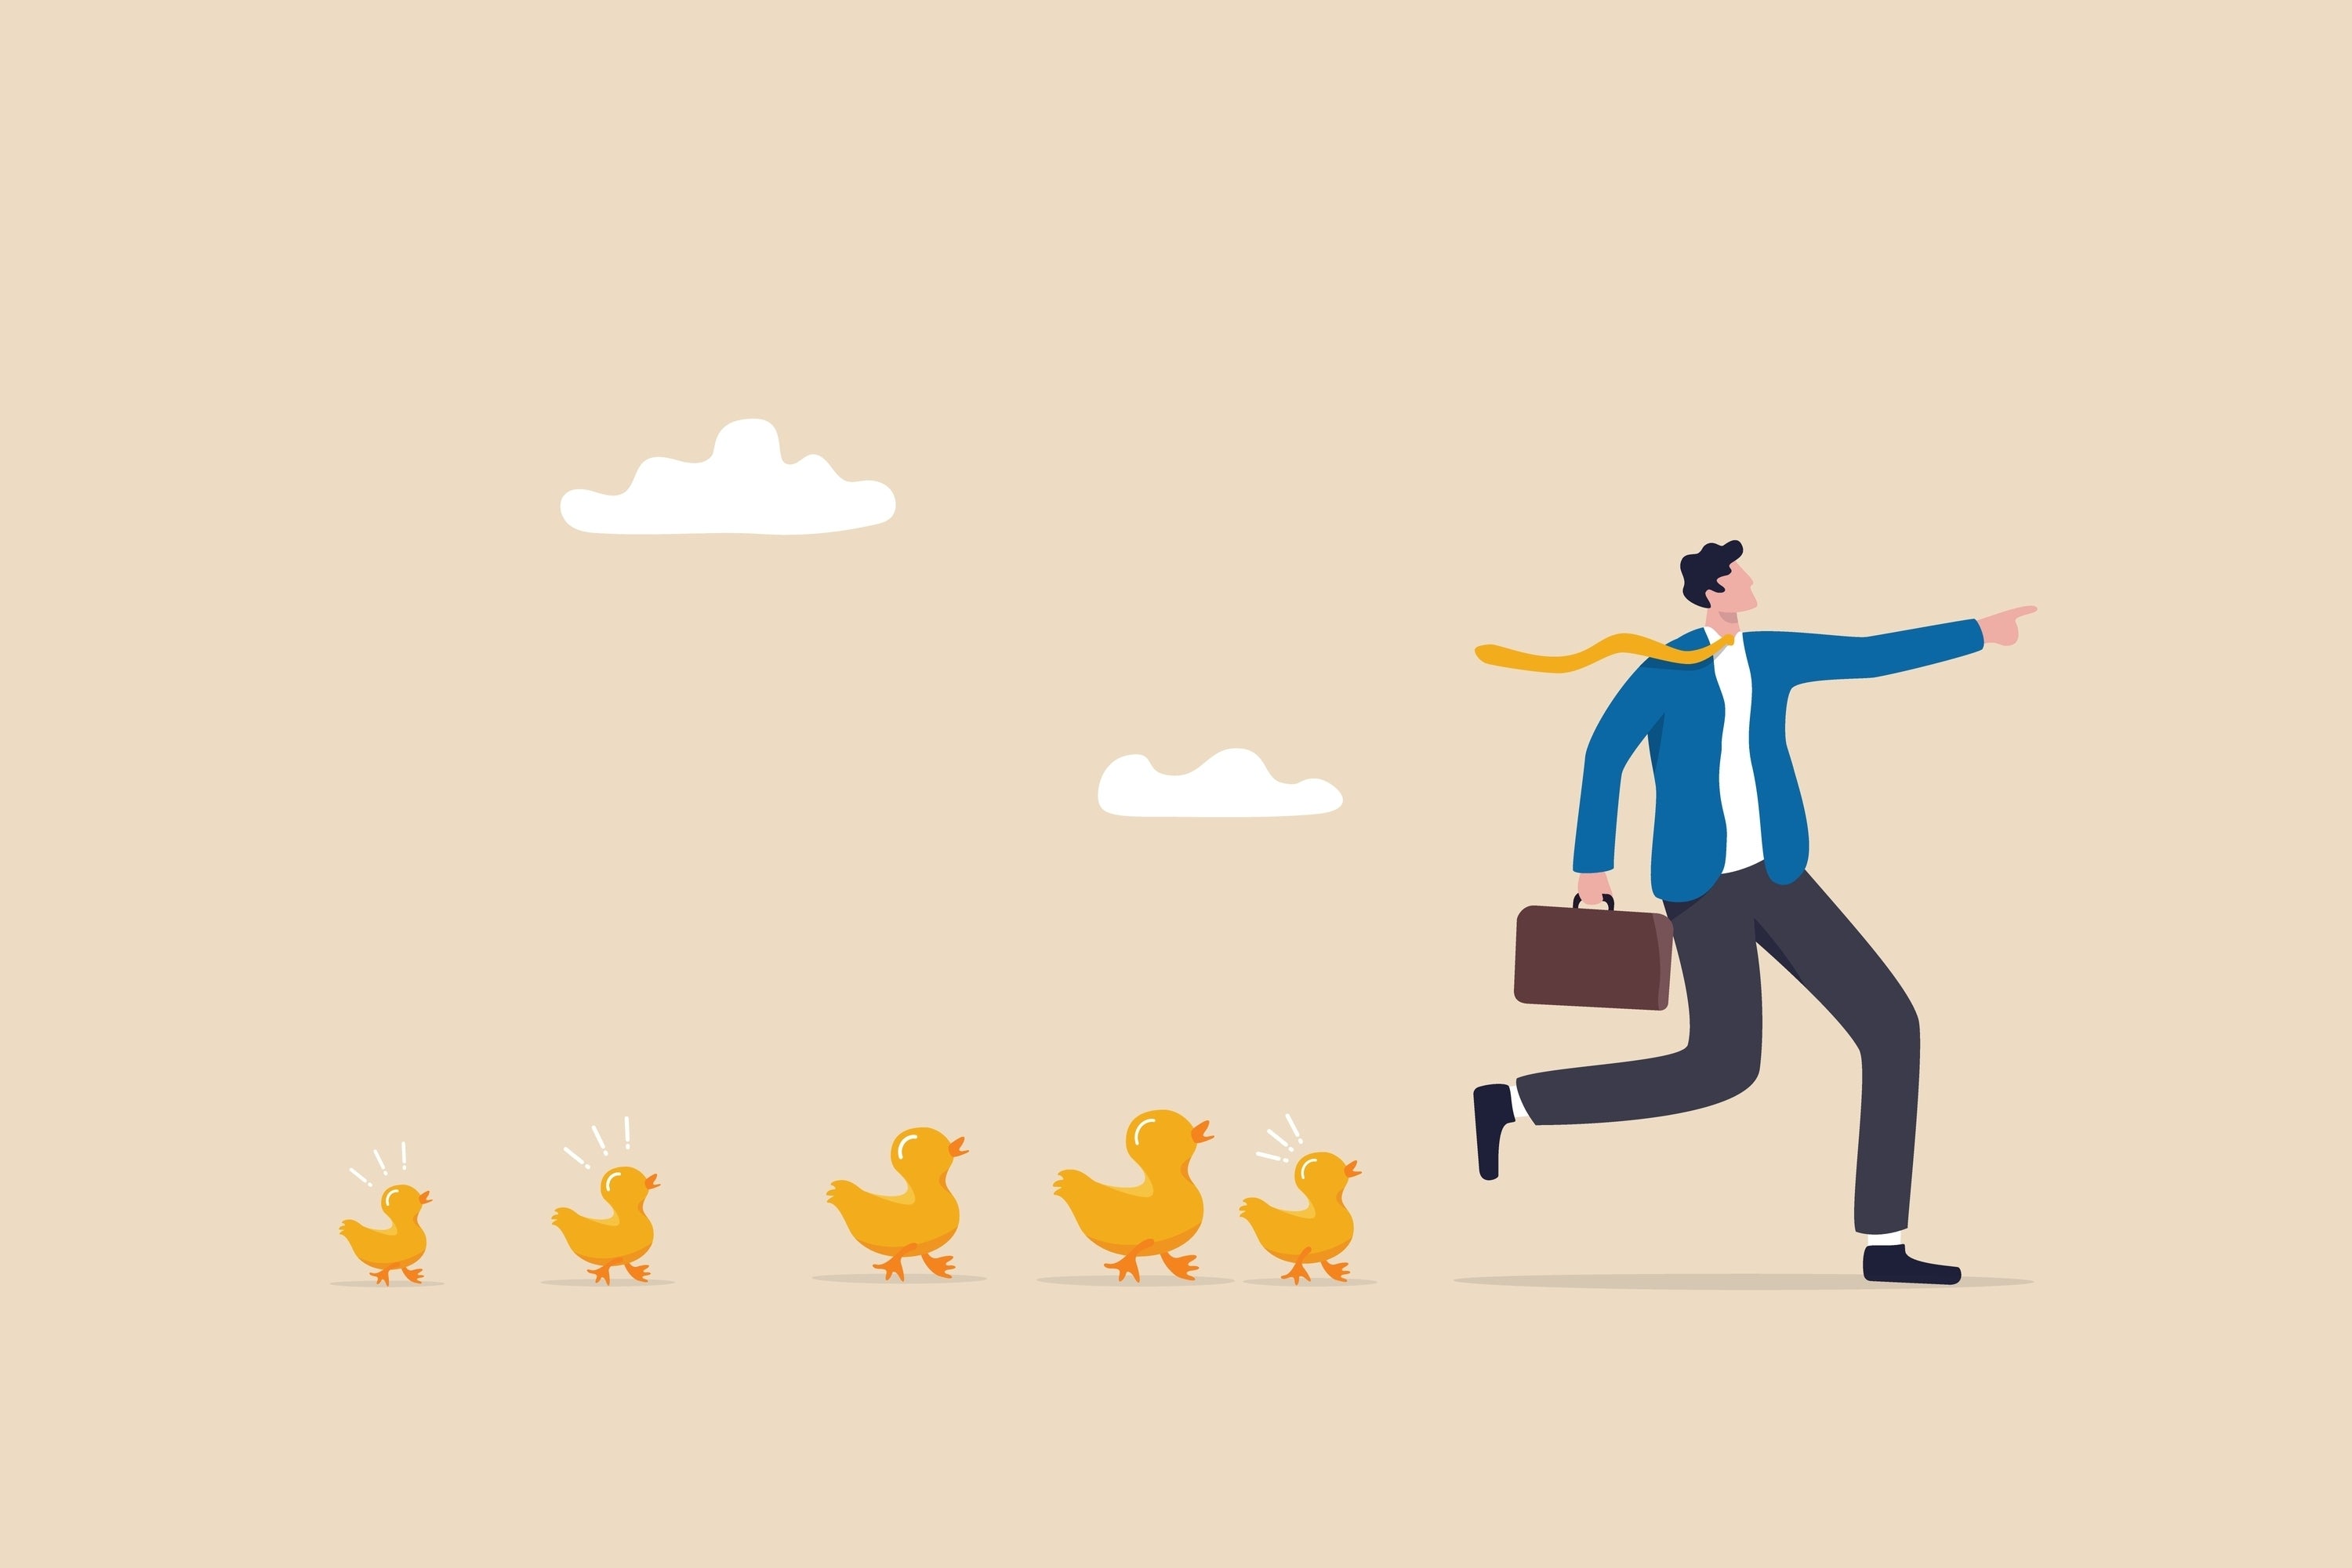 Businessman leader pointing in direction with following ducklings.